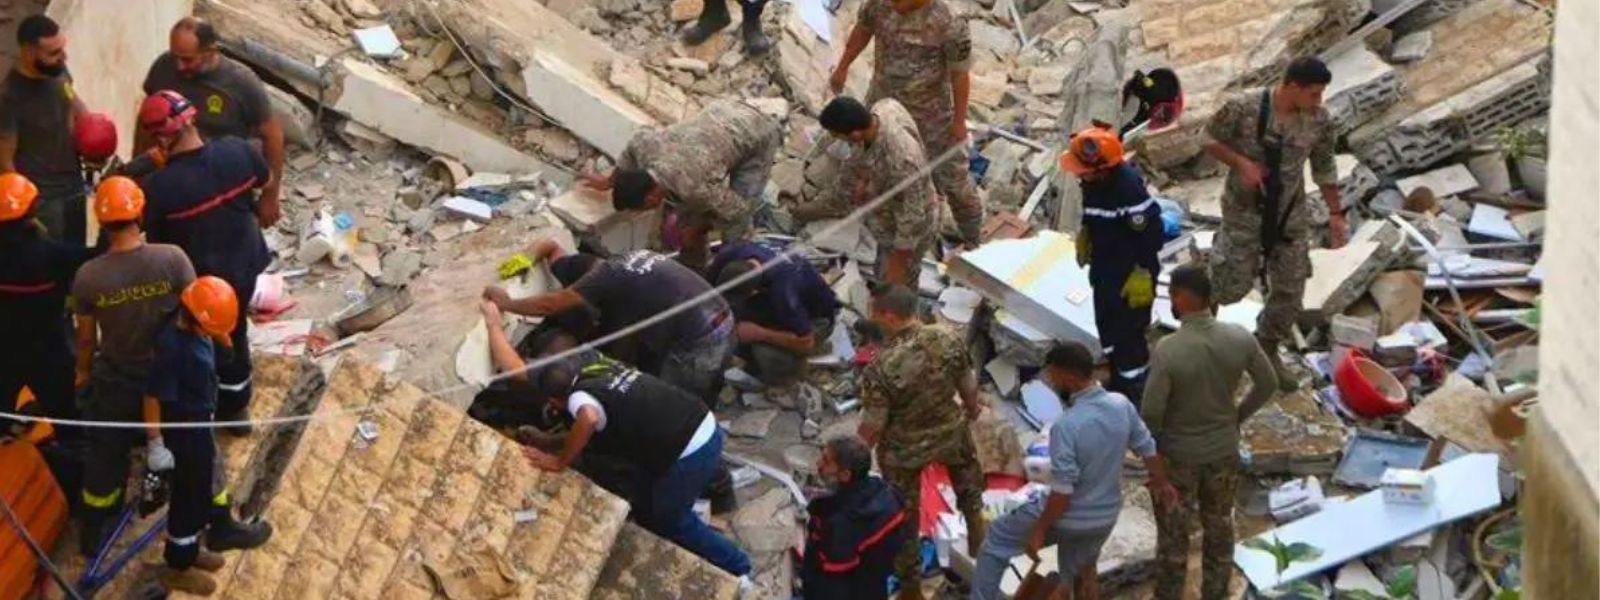 Lankan woman’s body recovered from Lebanon rubble